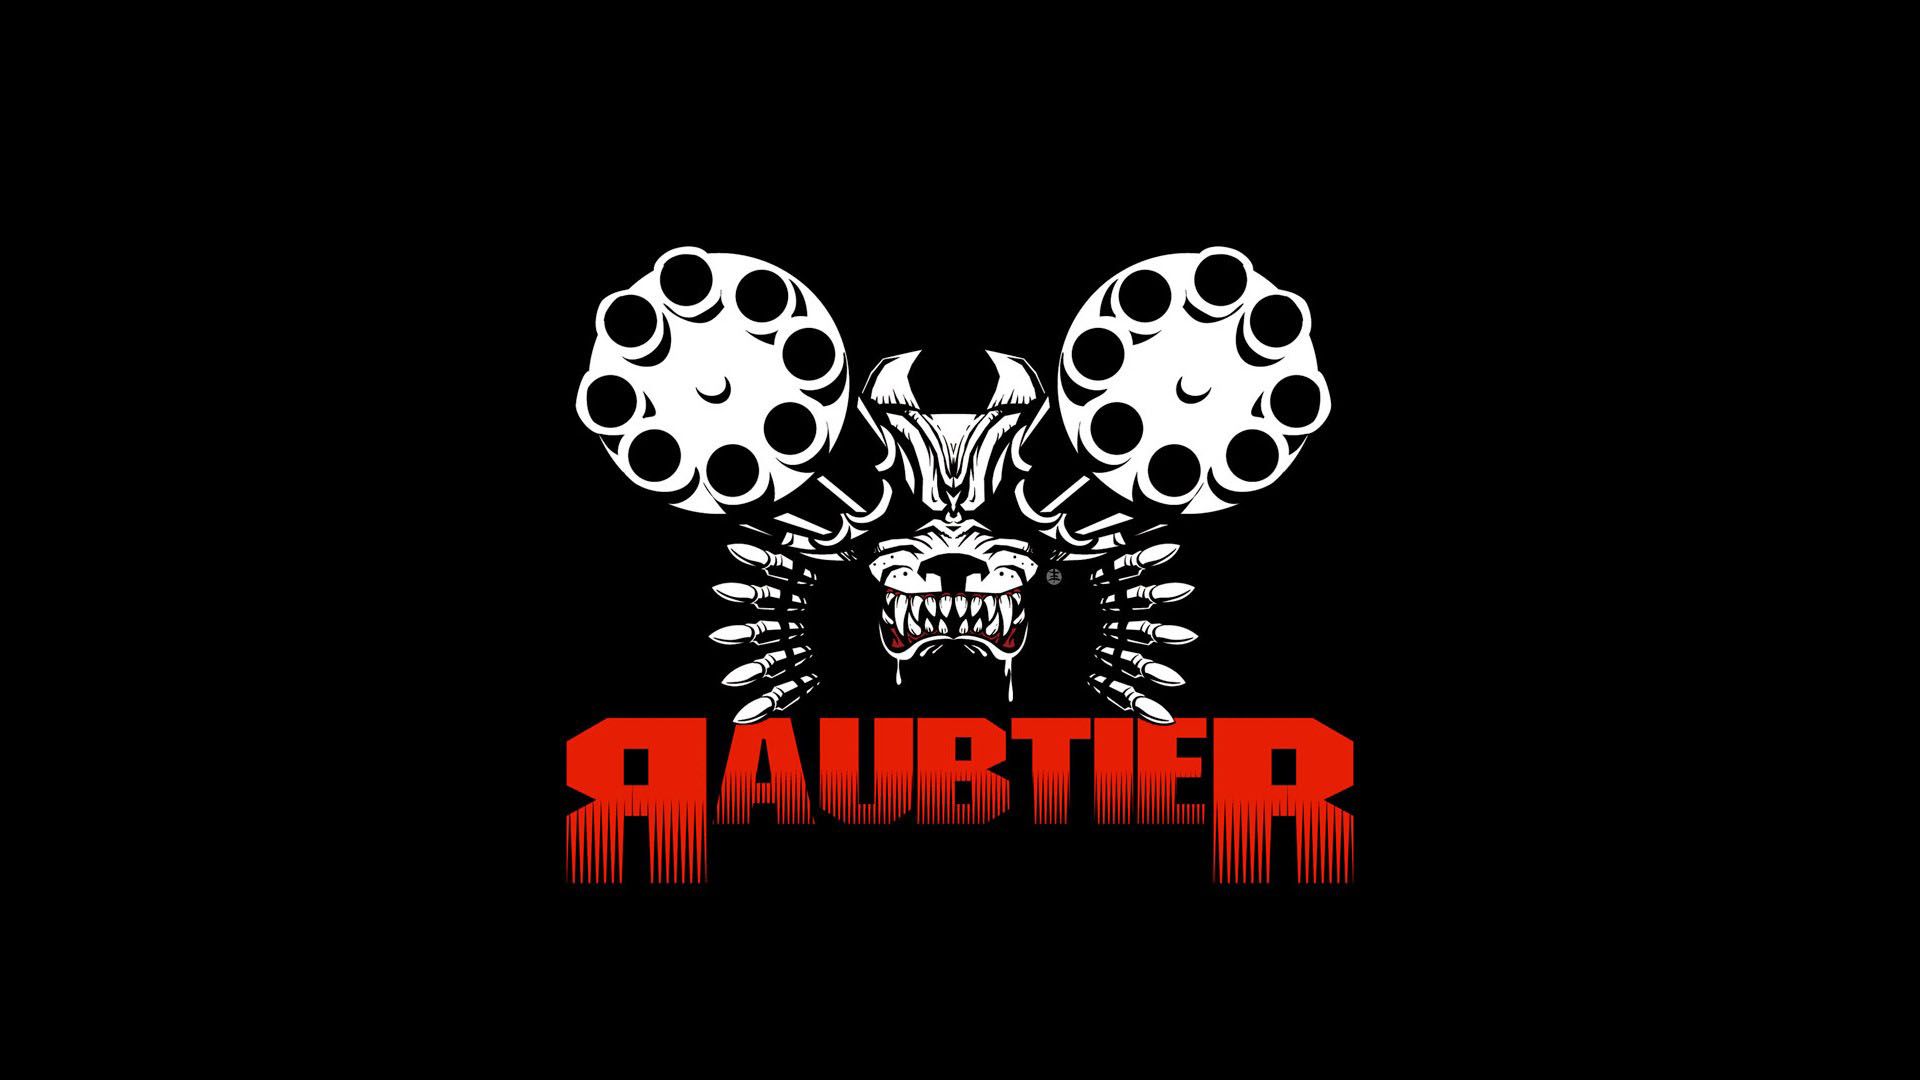 HQ Raubtier Background Images